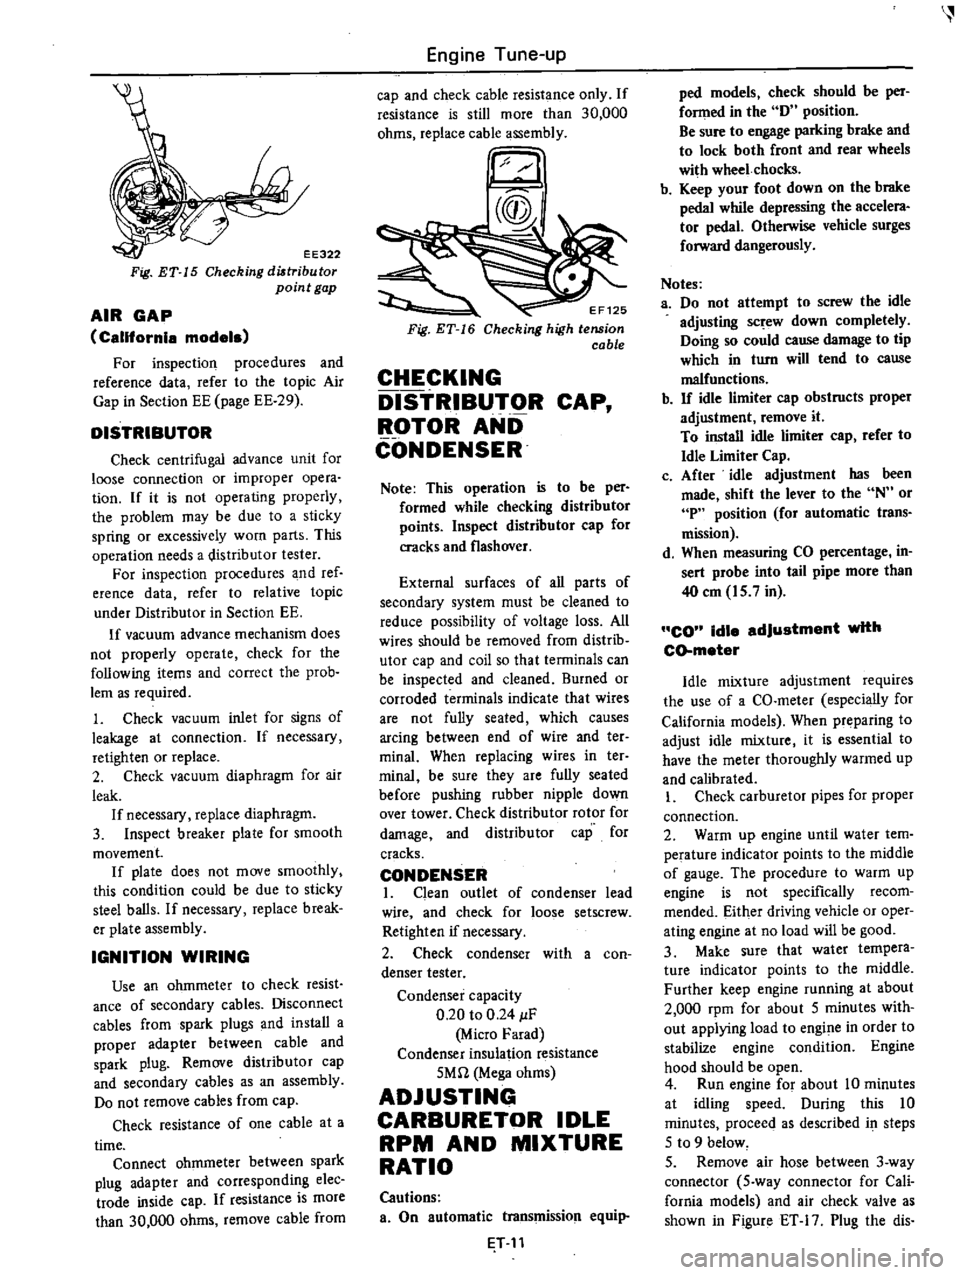 DATSUN PICK-UP 1977  Service Manual 
EE322

Fig 
ET 
15 
Checking 
diltribu 
tor

point

gap

AIR 
GAP

California 
models

For

inspection 
procedures 
and

reference 
data 
refer

to 
the

topic 
Air

Gap 
in

Section 
EE

page 
EE 
2